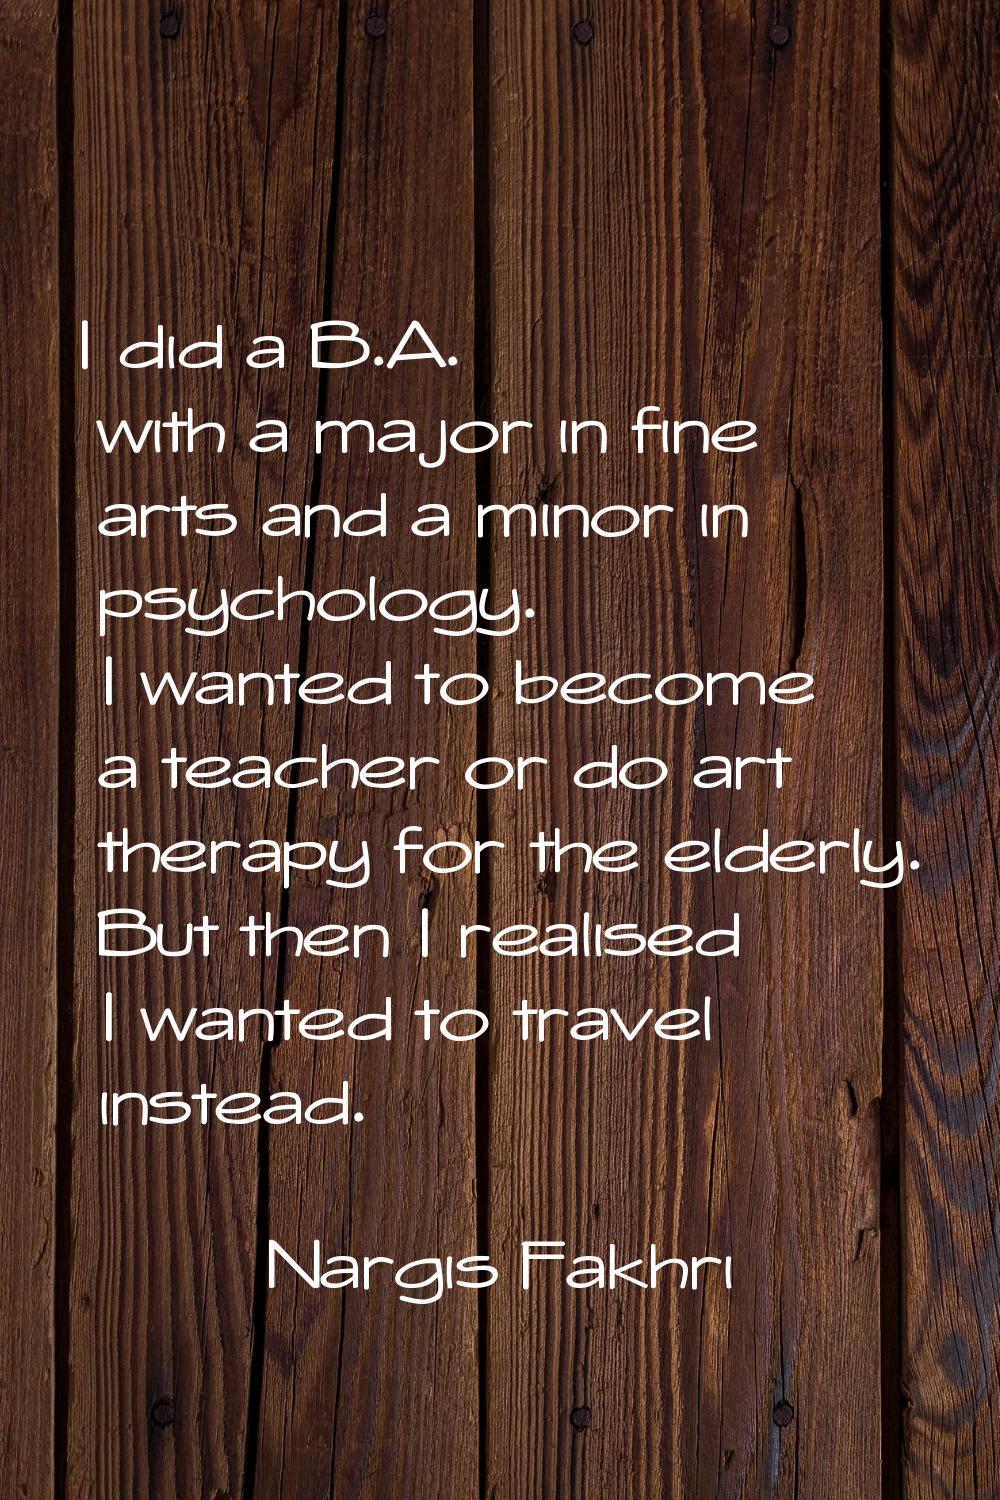 I did a B.A. with a major in fine arts and a minor in psychology. I wanted to become a teacher or d